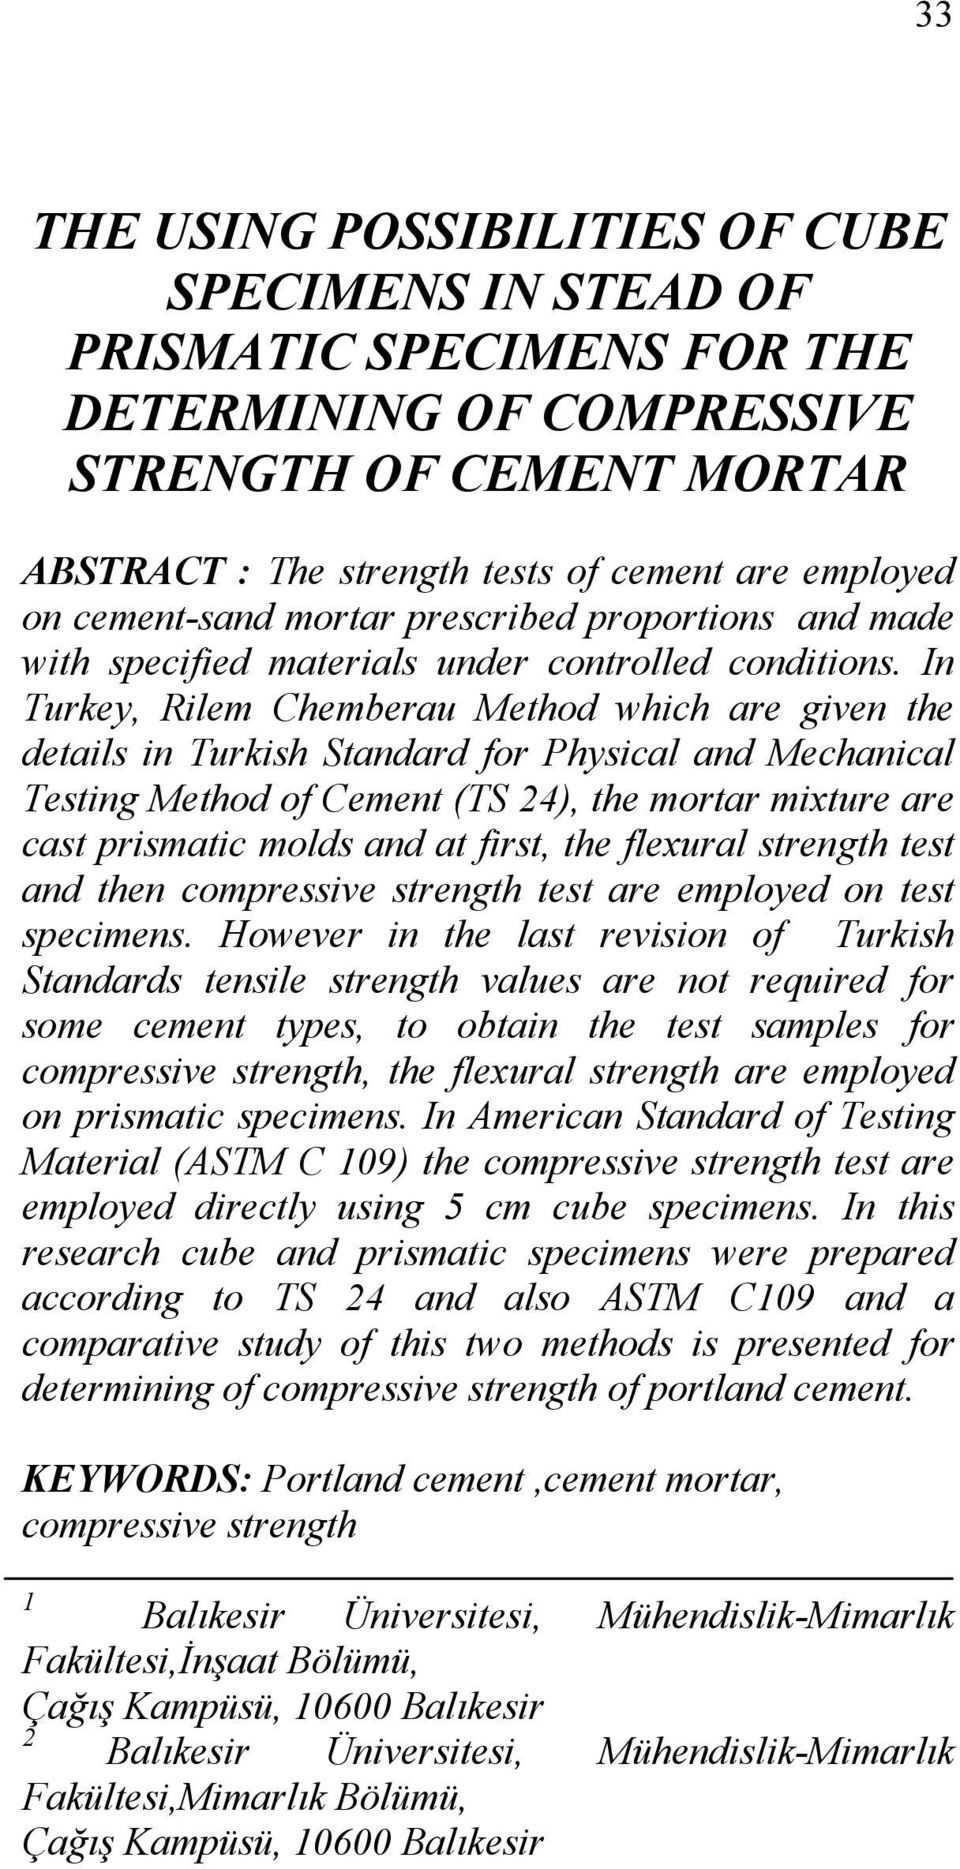 In Turkey, Rilem Chemberau Method which are given the details in Turkish Standard for Physical and Mechanical Testing Method of Cement (TS 24), the mortar mixture are cast prismatic molds and at